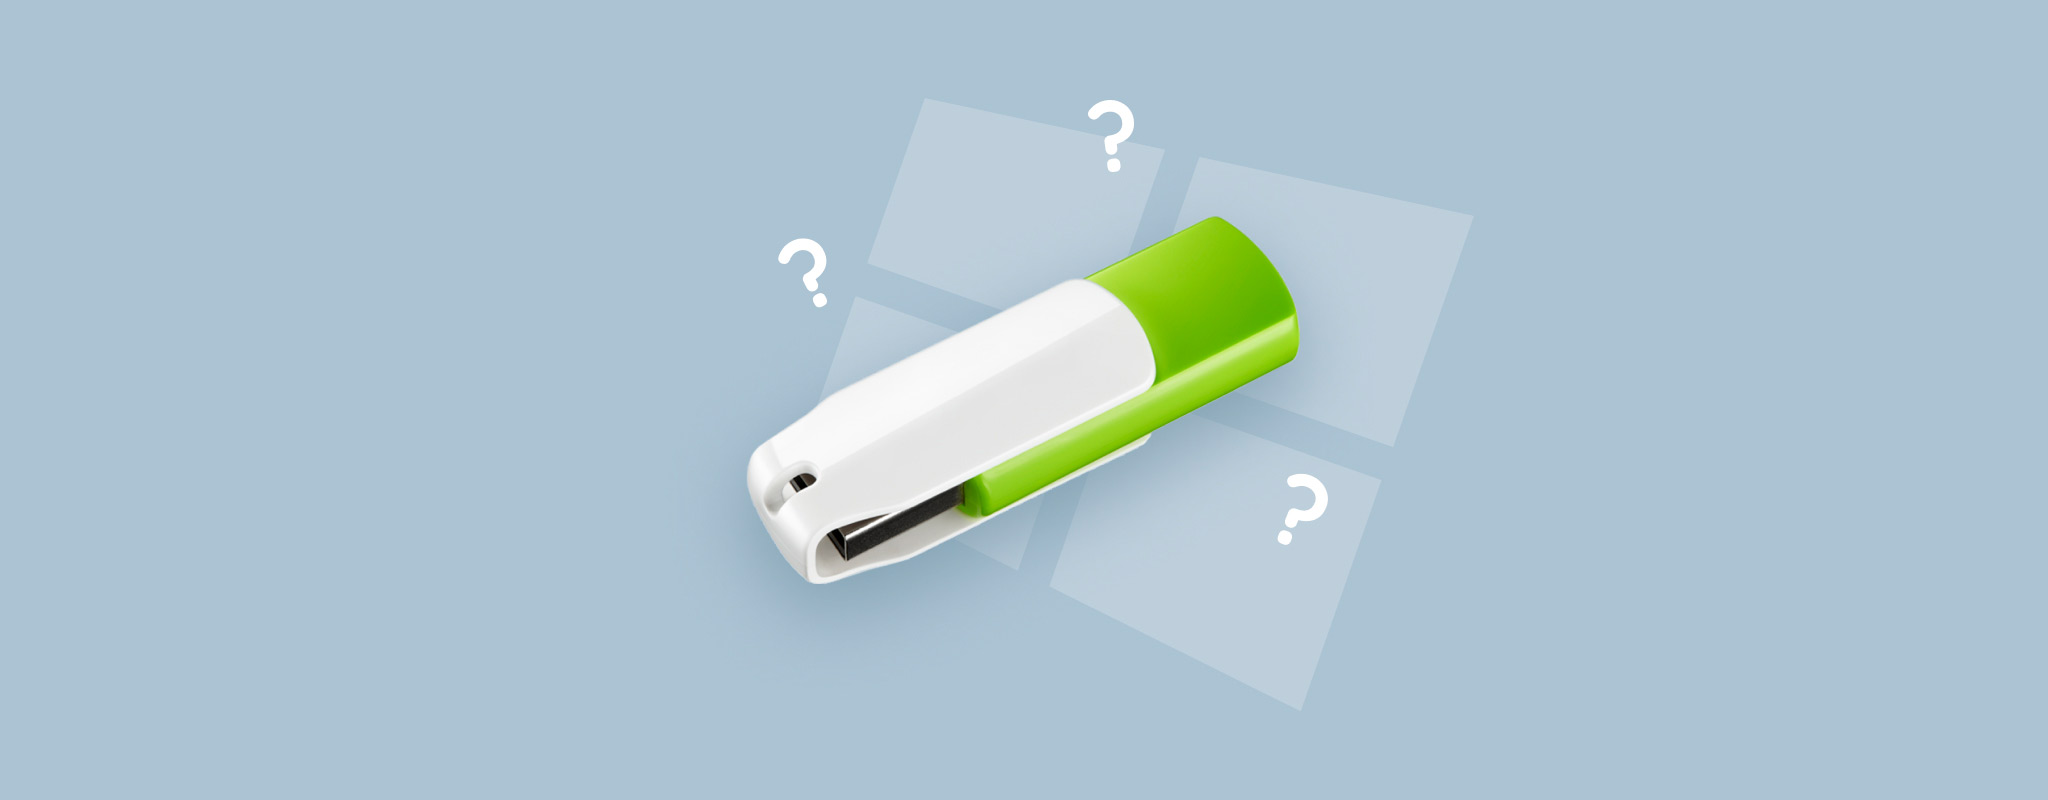 How to Fix a USB Flash Drive That Is Not Recognized on Windows 10